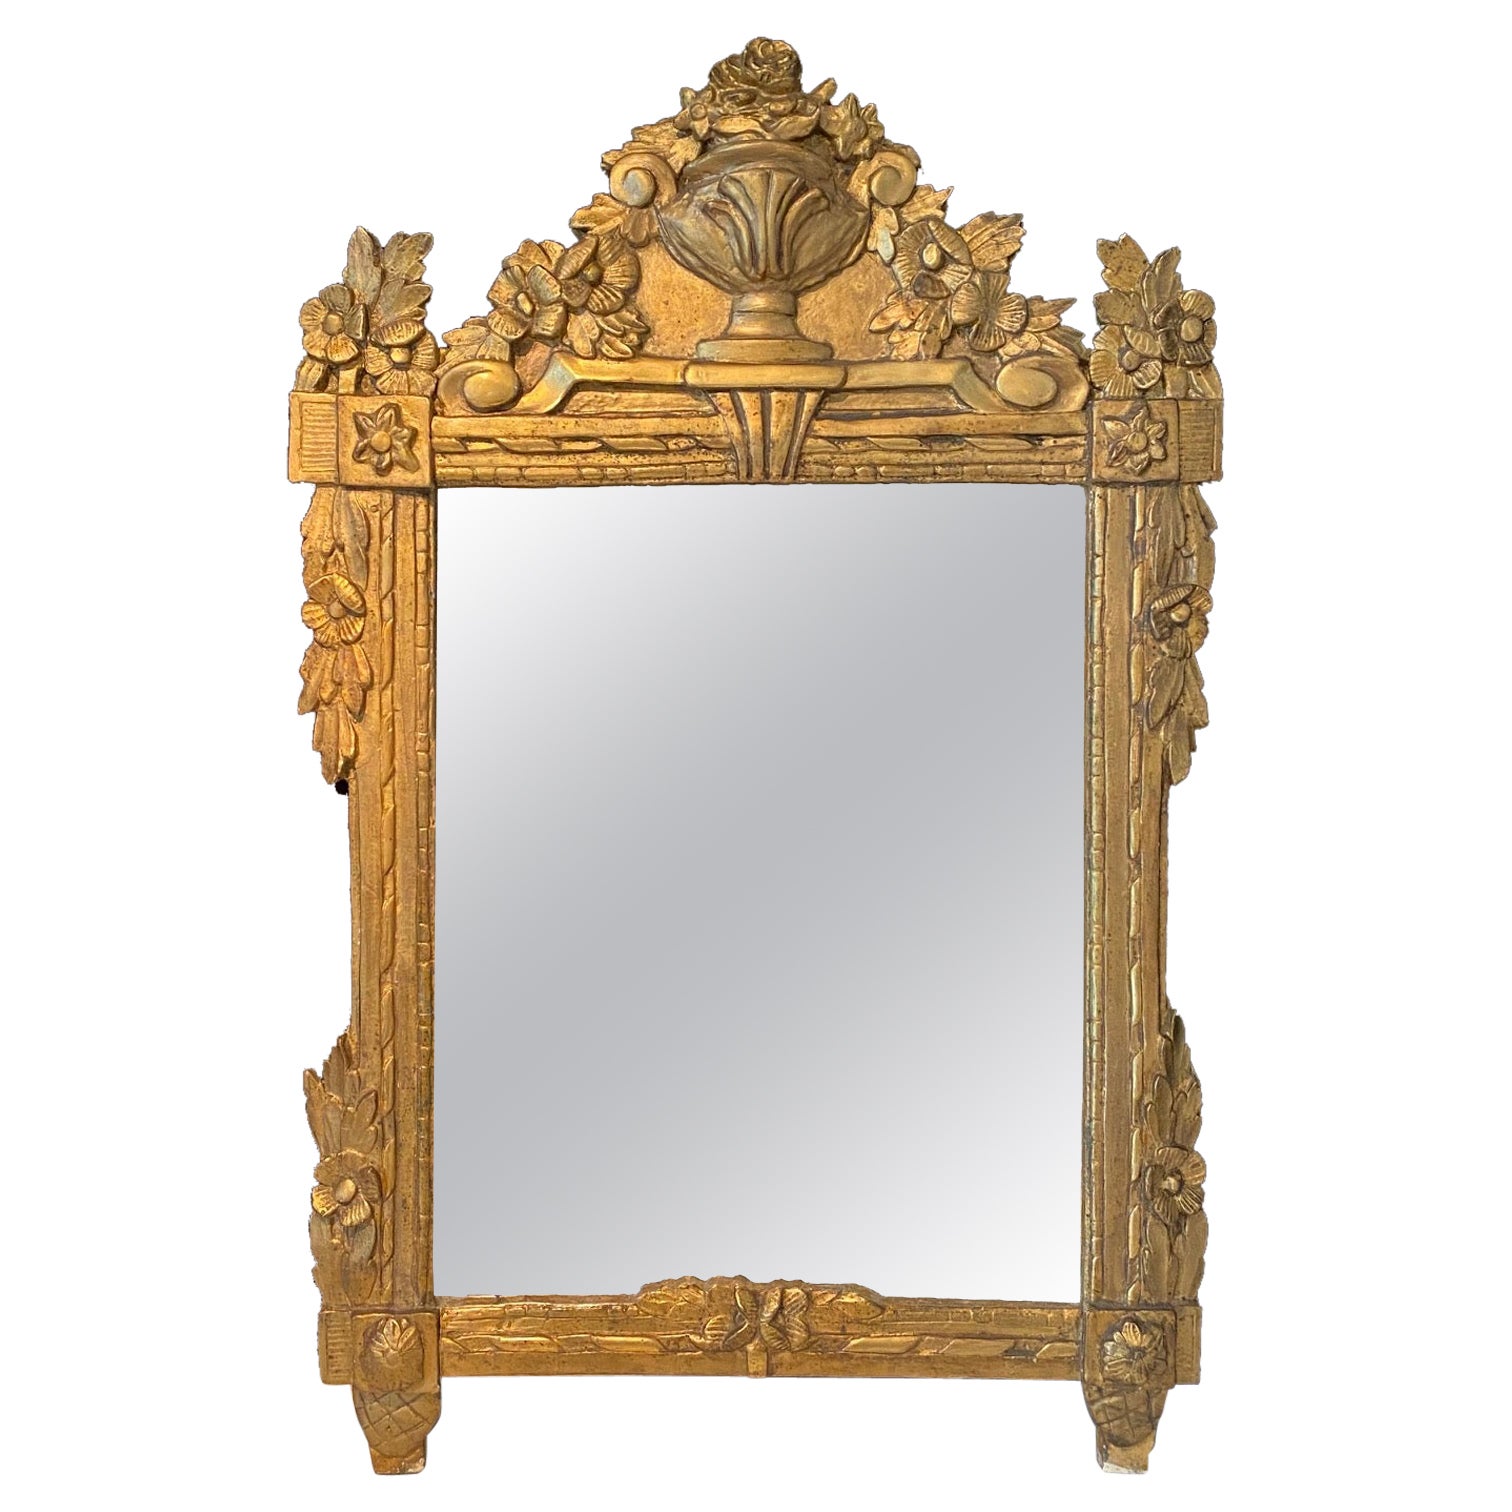  19th Century French Period Louis XVI Gold Mirror with Center Urn  For Sale